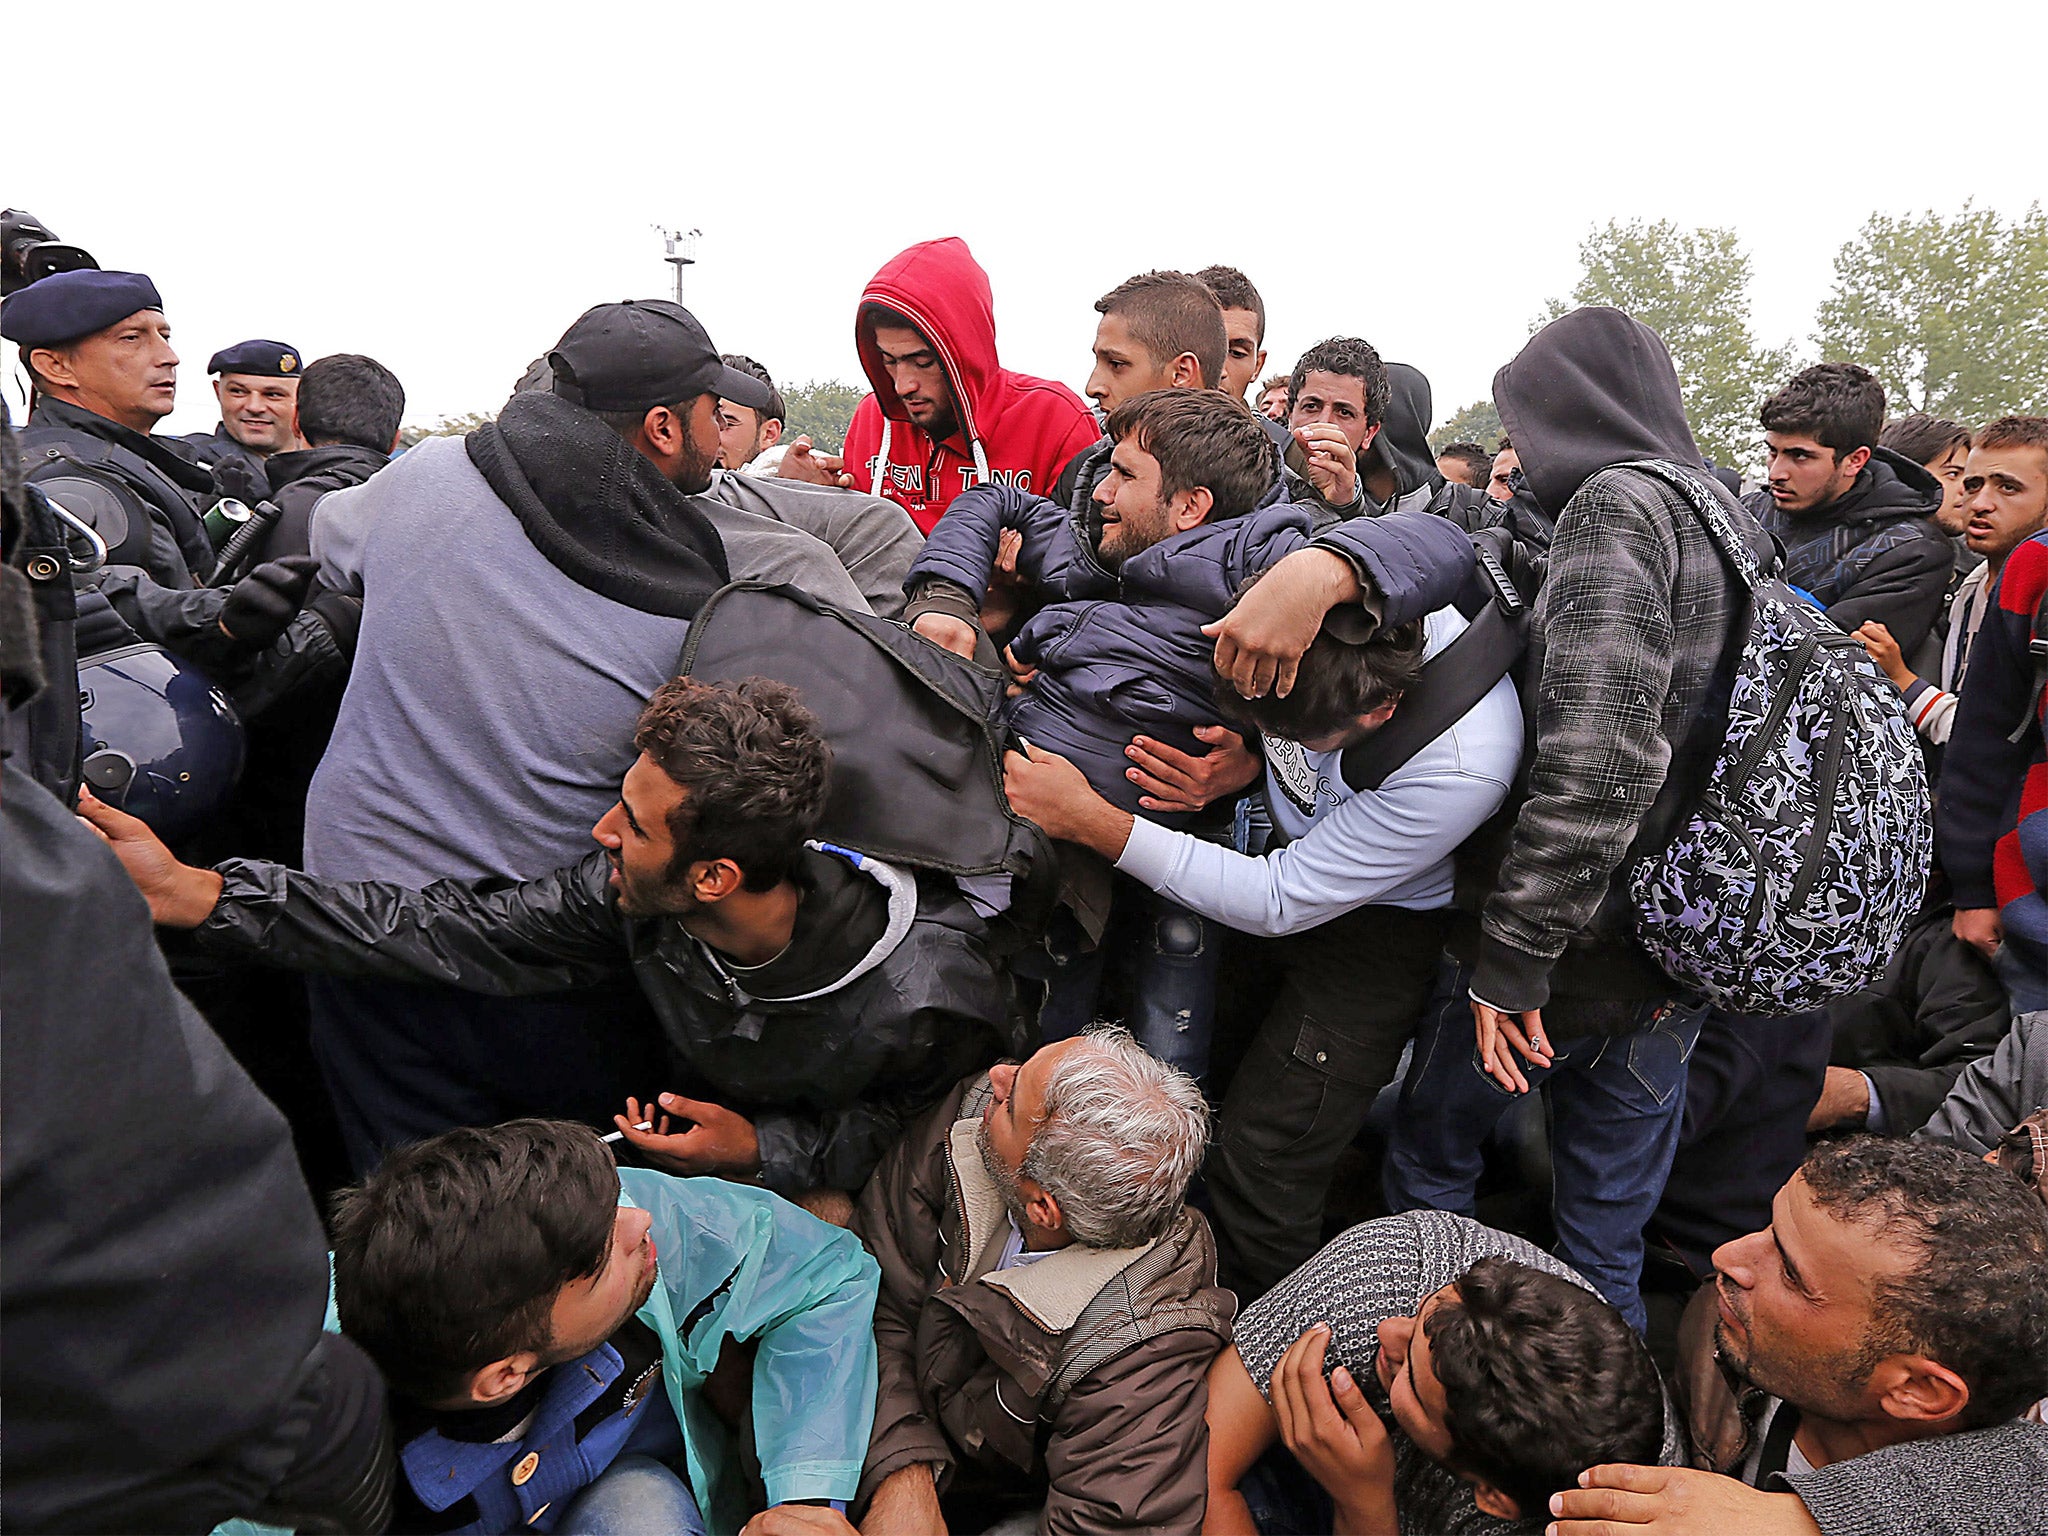 Refugees try to push the police on the entrance of a registration camp in the village of Opatovac